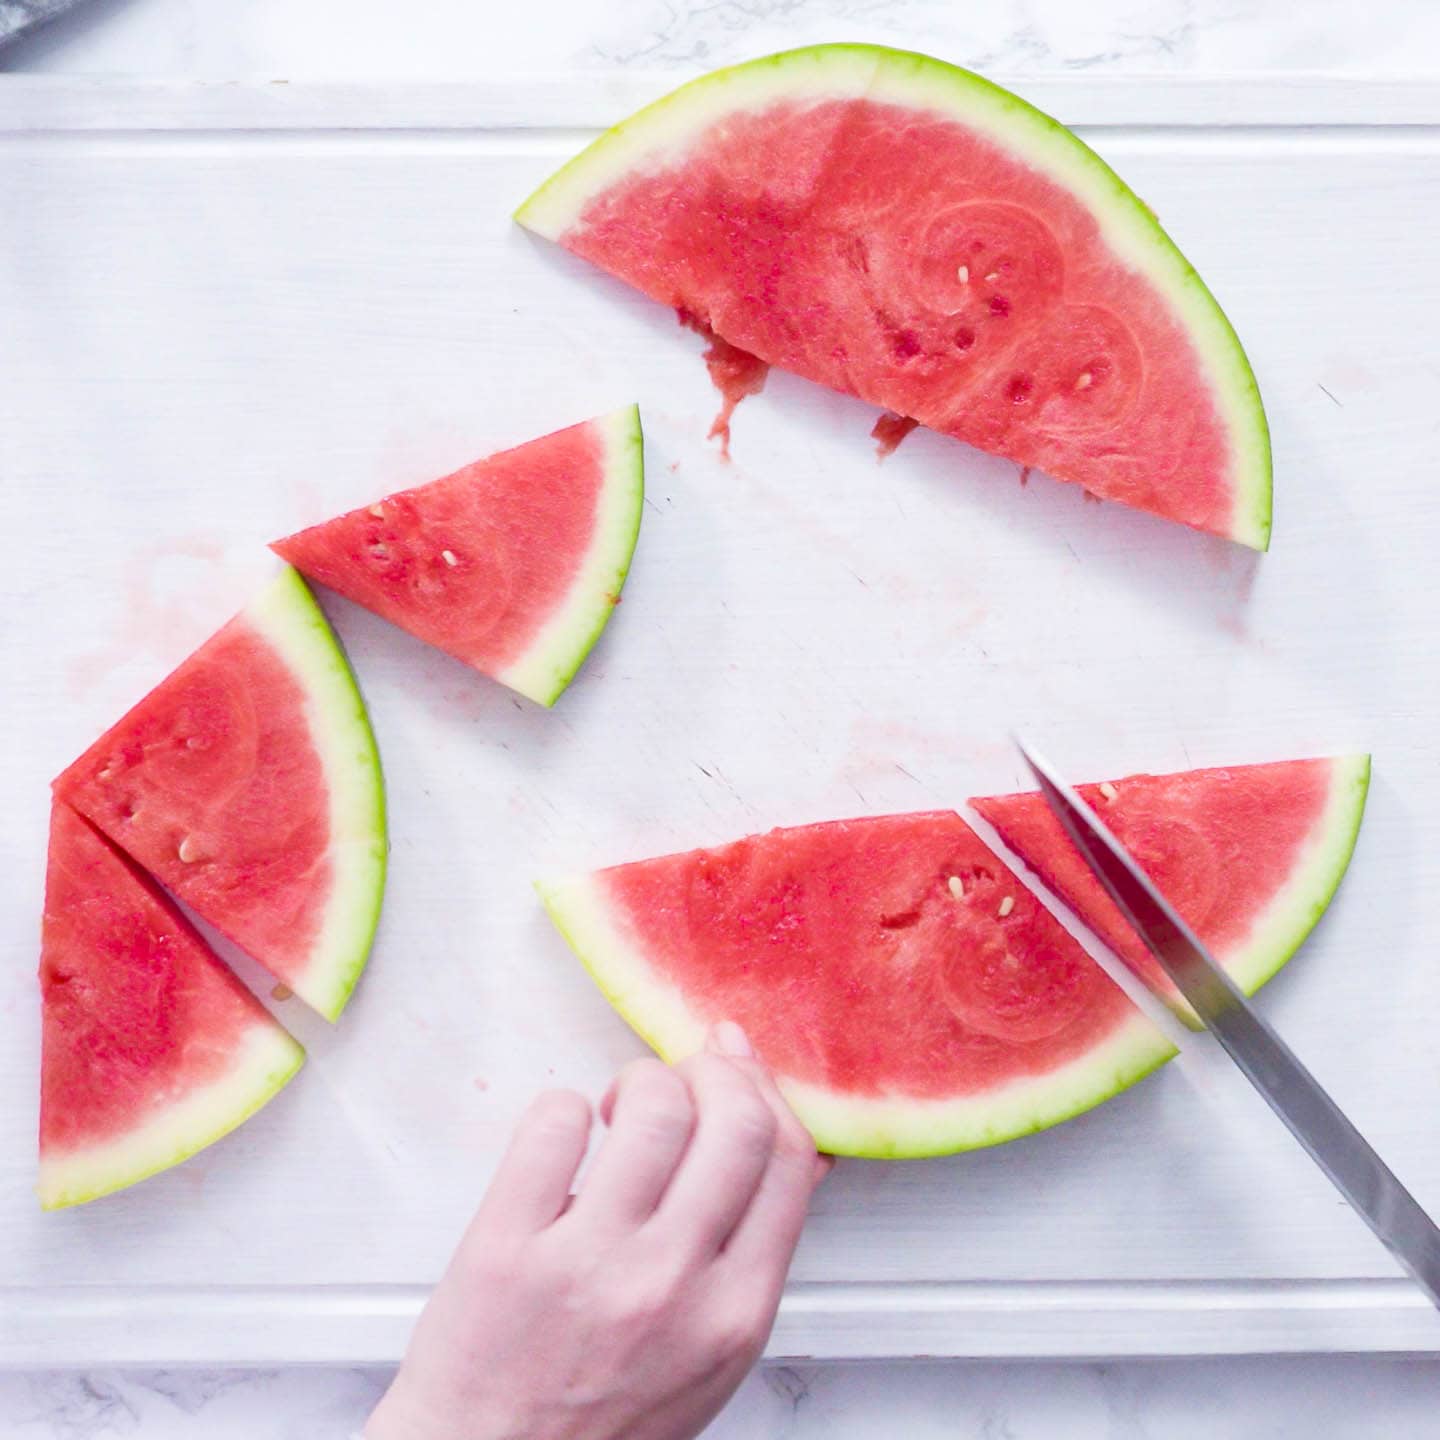 watermelon being cut into wedges